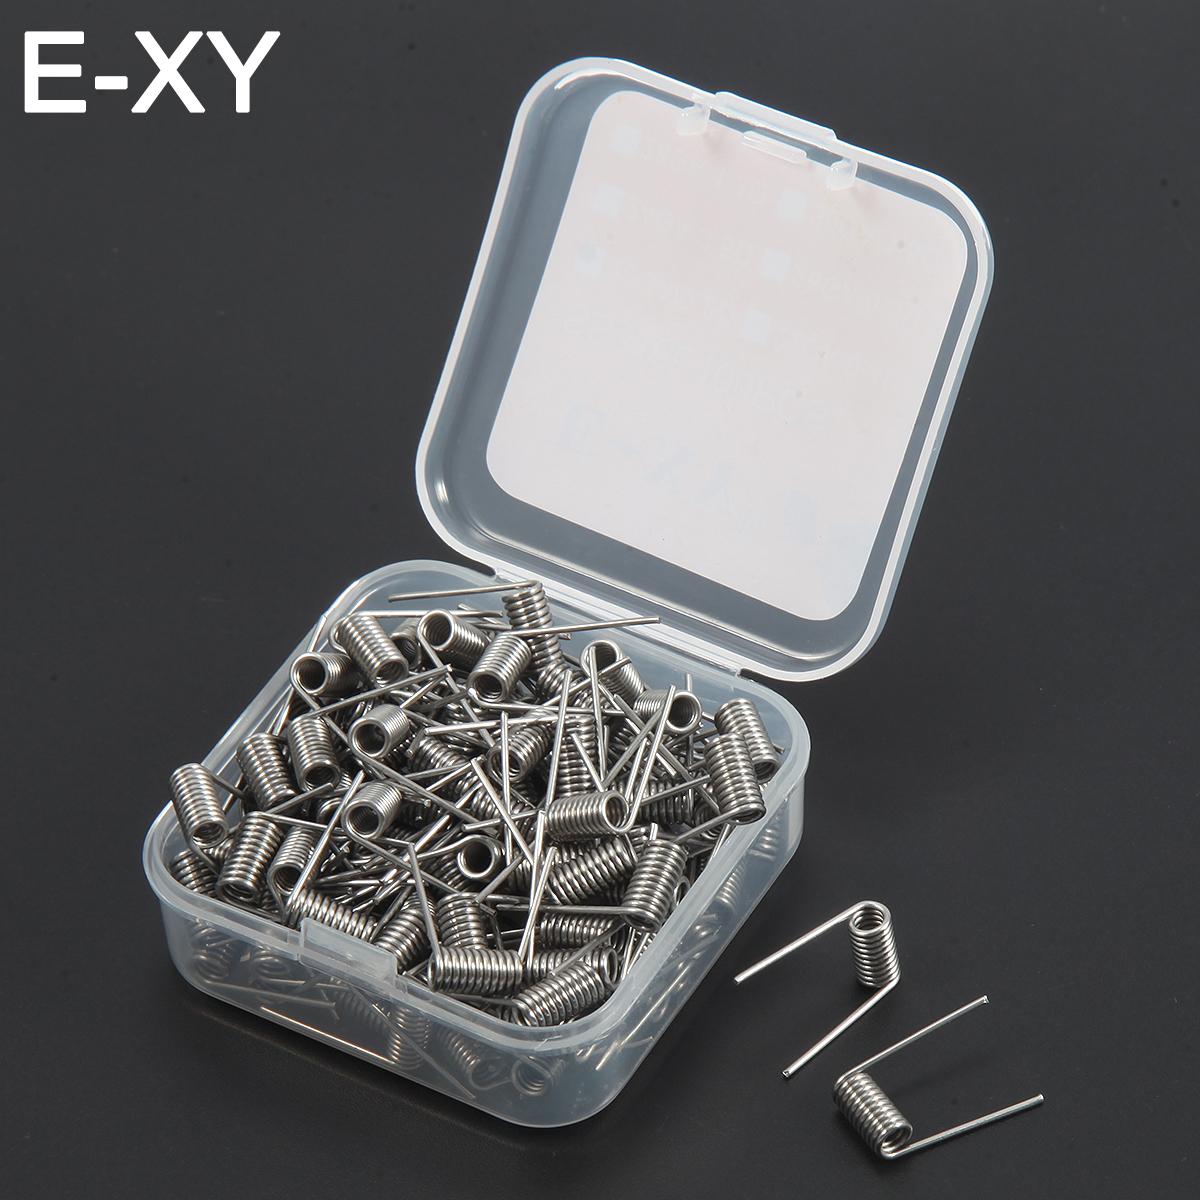 E-XY SS316L Stainless Steel Pre-coiled Coil for RDTA RTA RDA RBA Building x 100